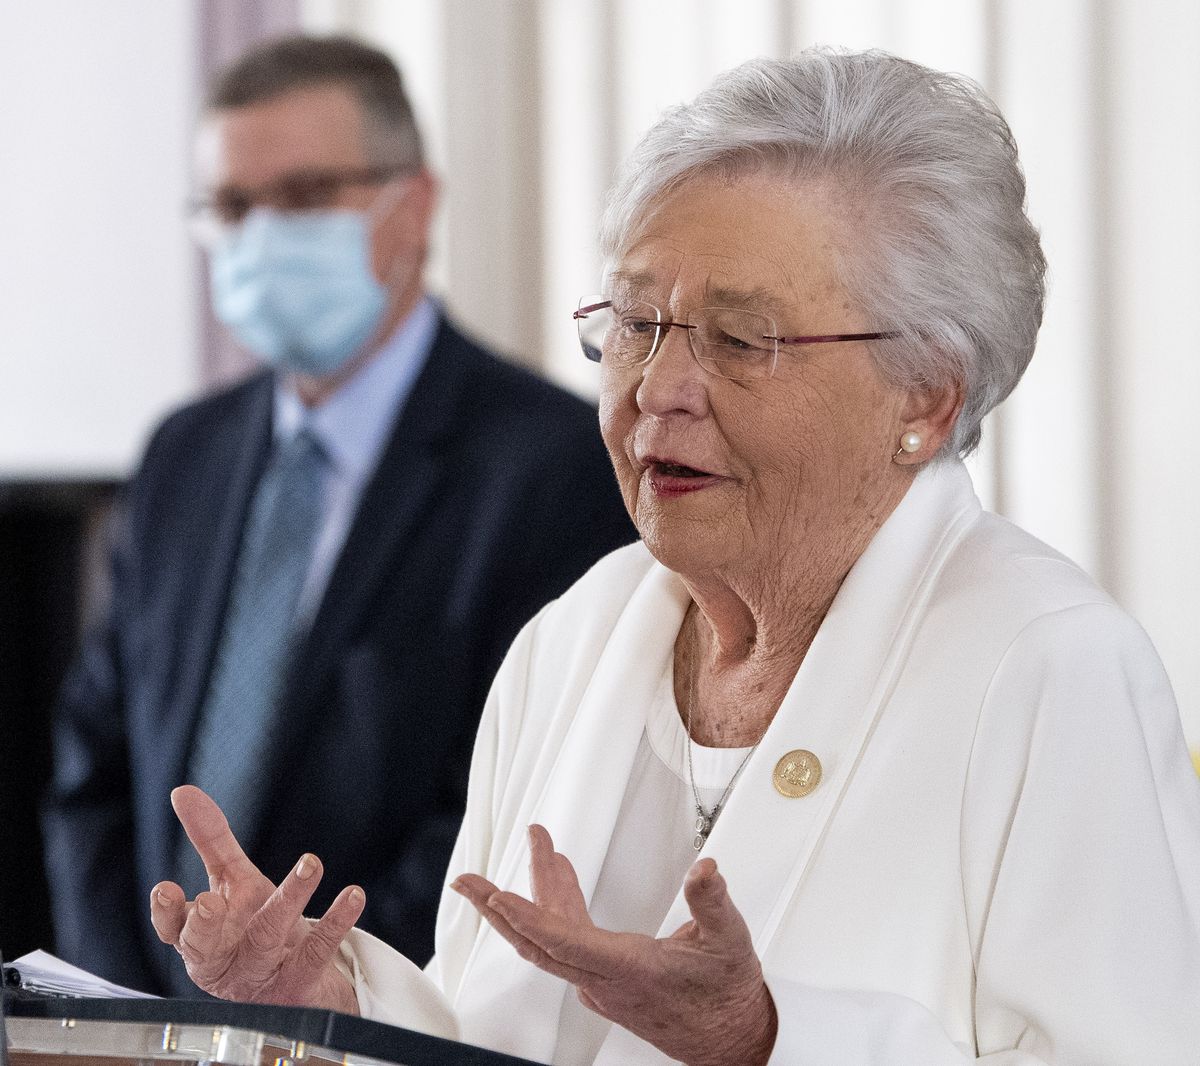 Alabama Gov. Kay Ivey gives a COVID-19 update during a news conference at the Alabama Capitol Building in Montgomery, Ala., on Thursday March 4, 2021. With states including Texas and neighboring Mississippi ending masking requirements, Ivey announced Thursday that masks will be required in the state of nearly 5 million people through April 9.  (Mickey Welsh)